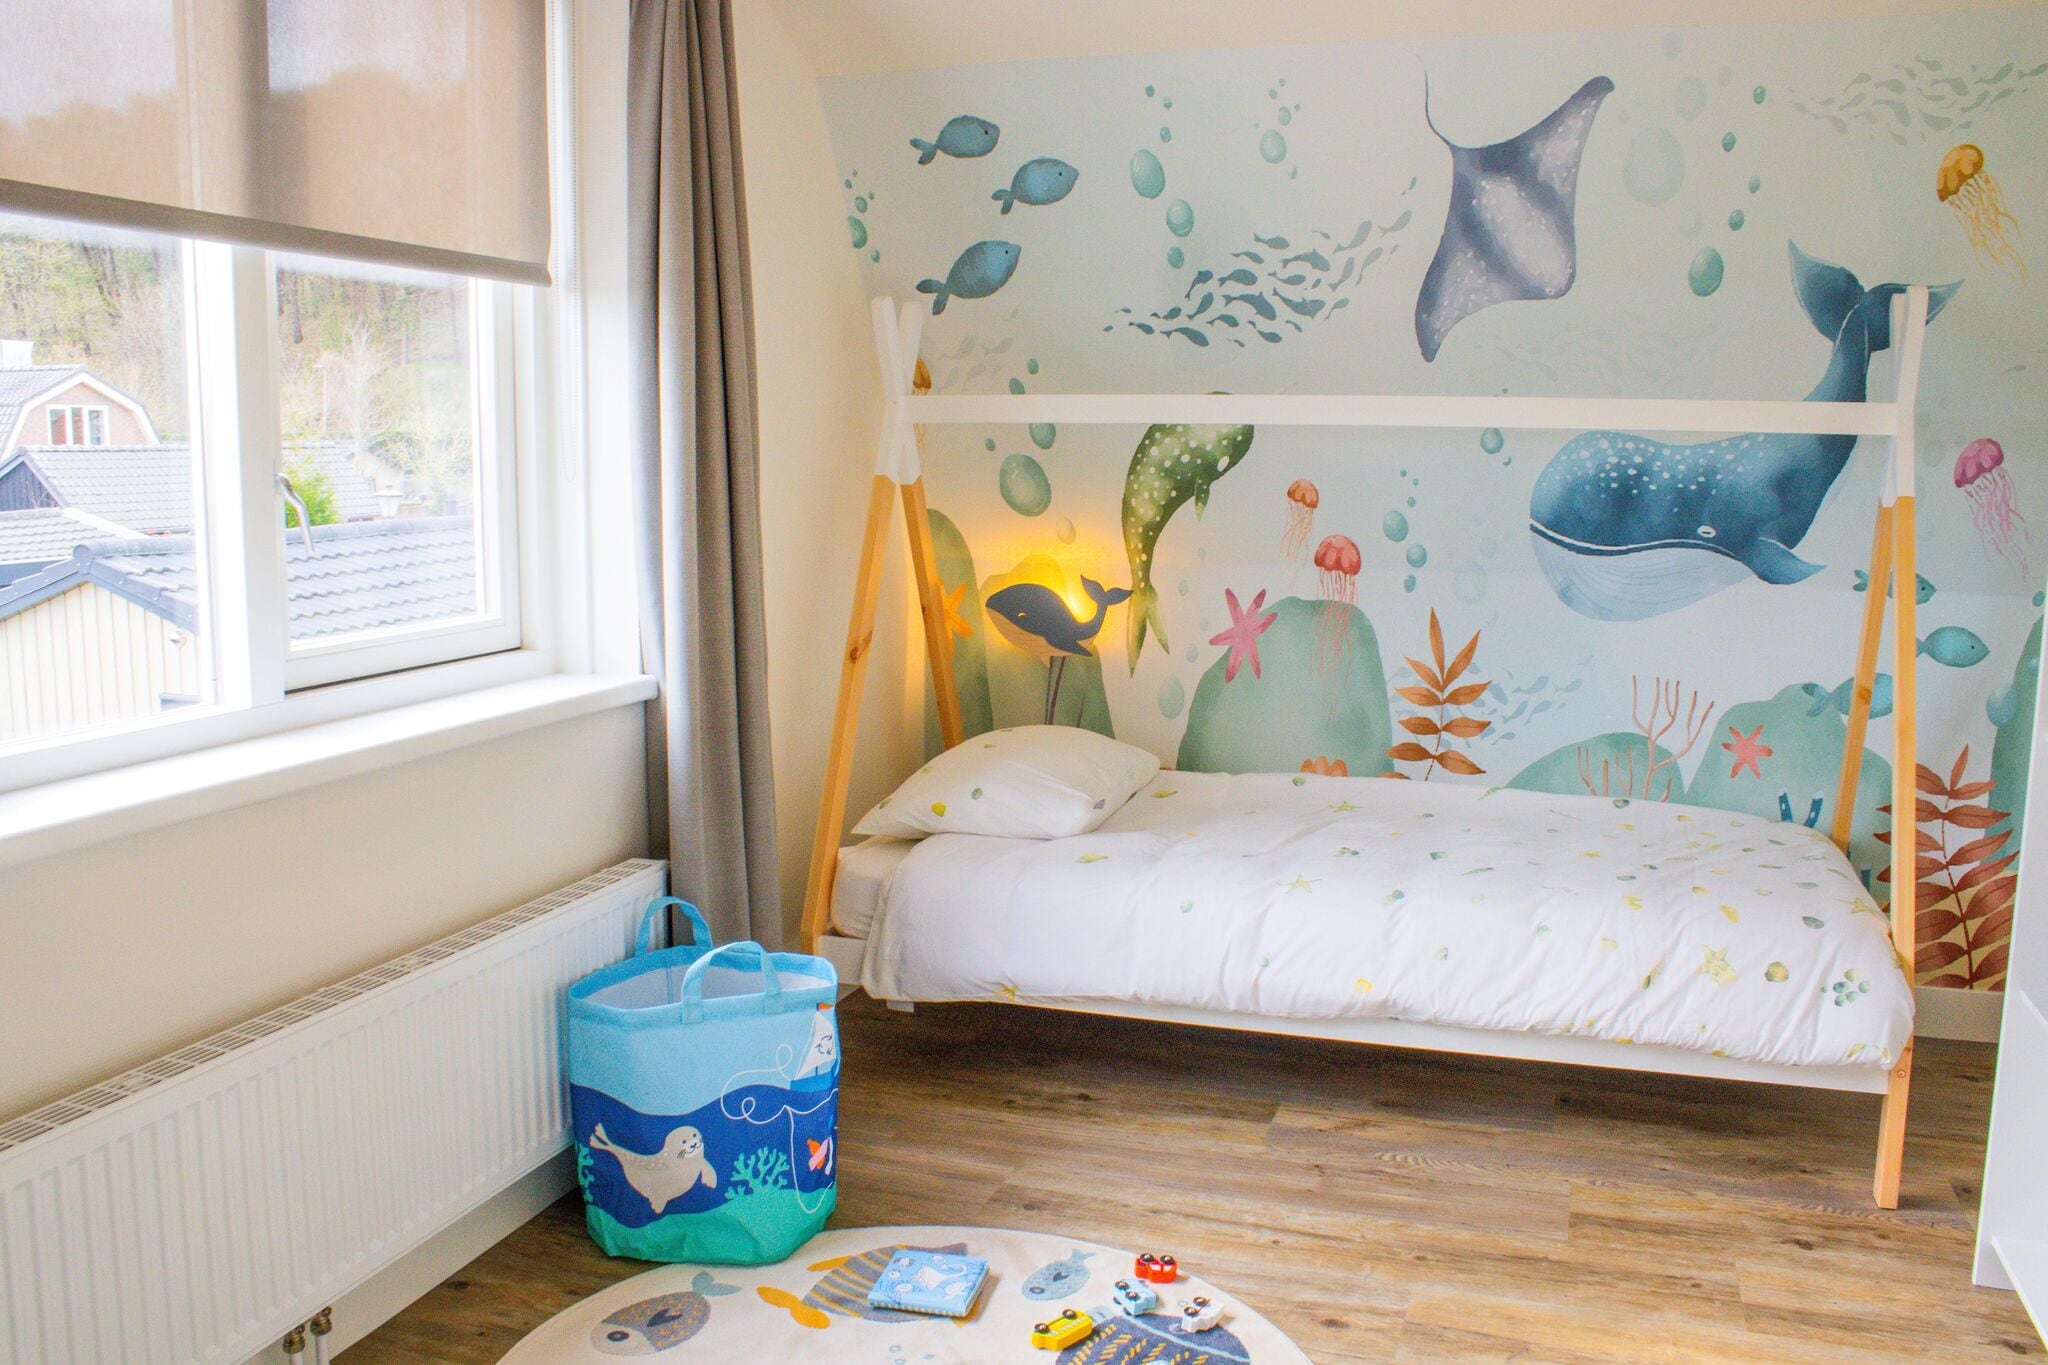 Child-friendly holiday home near the North Sea